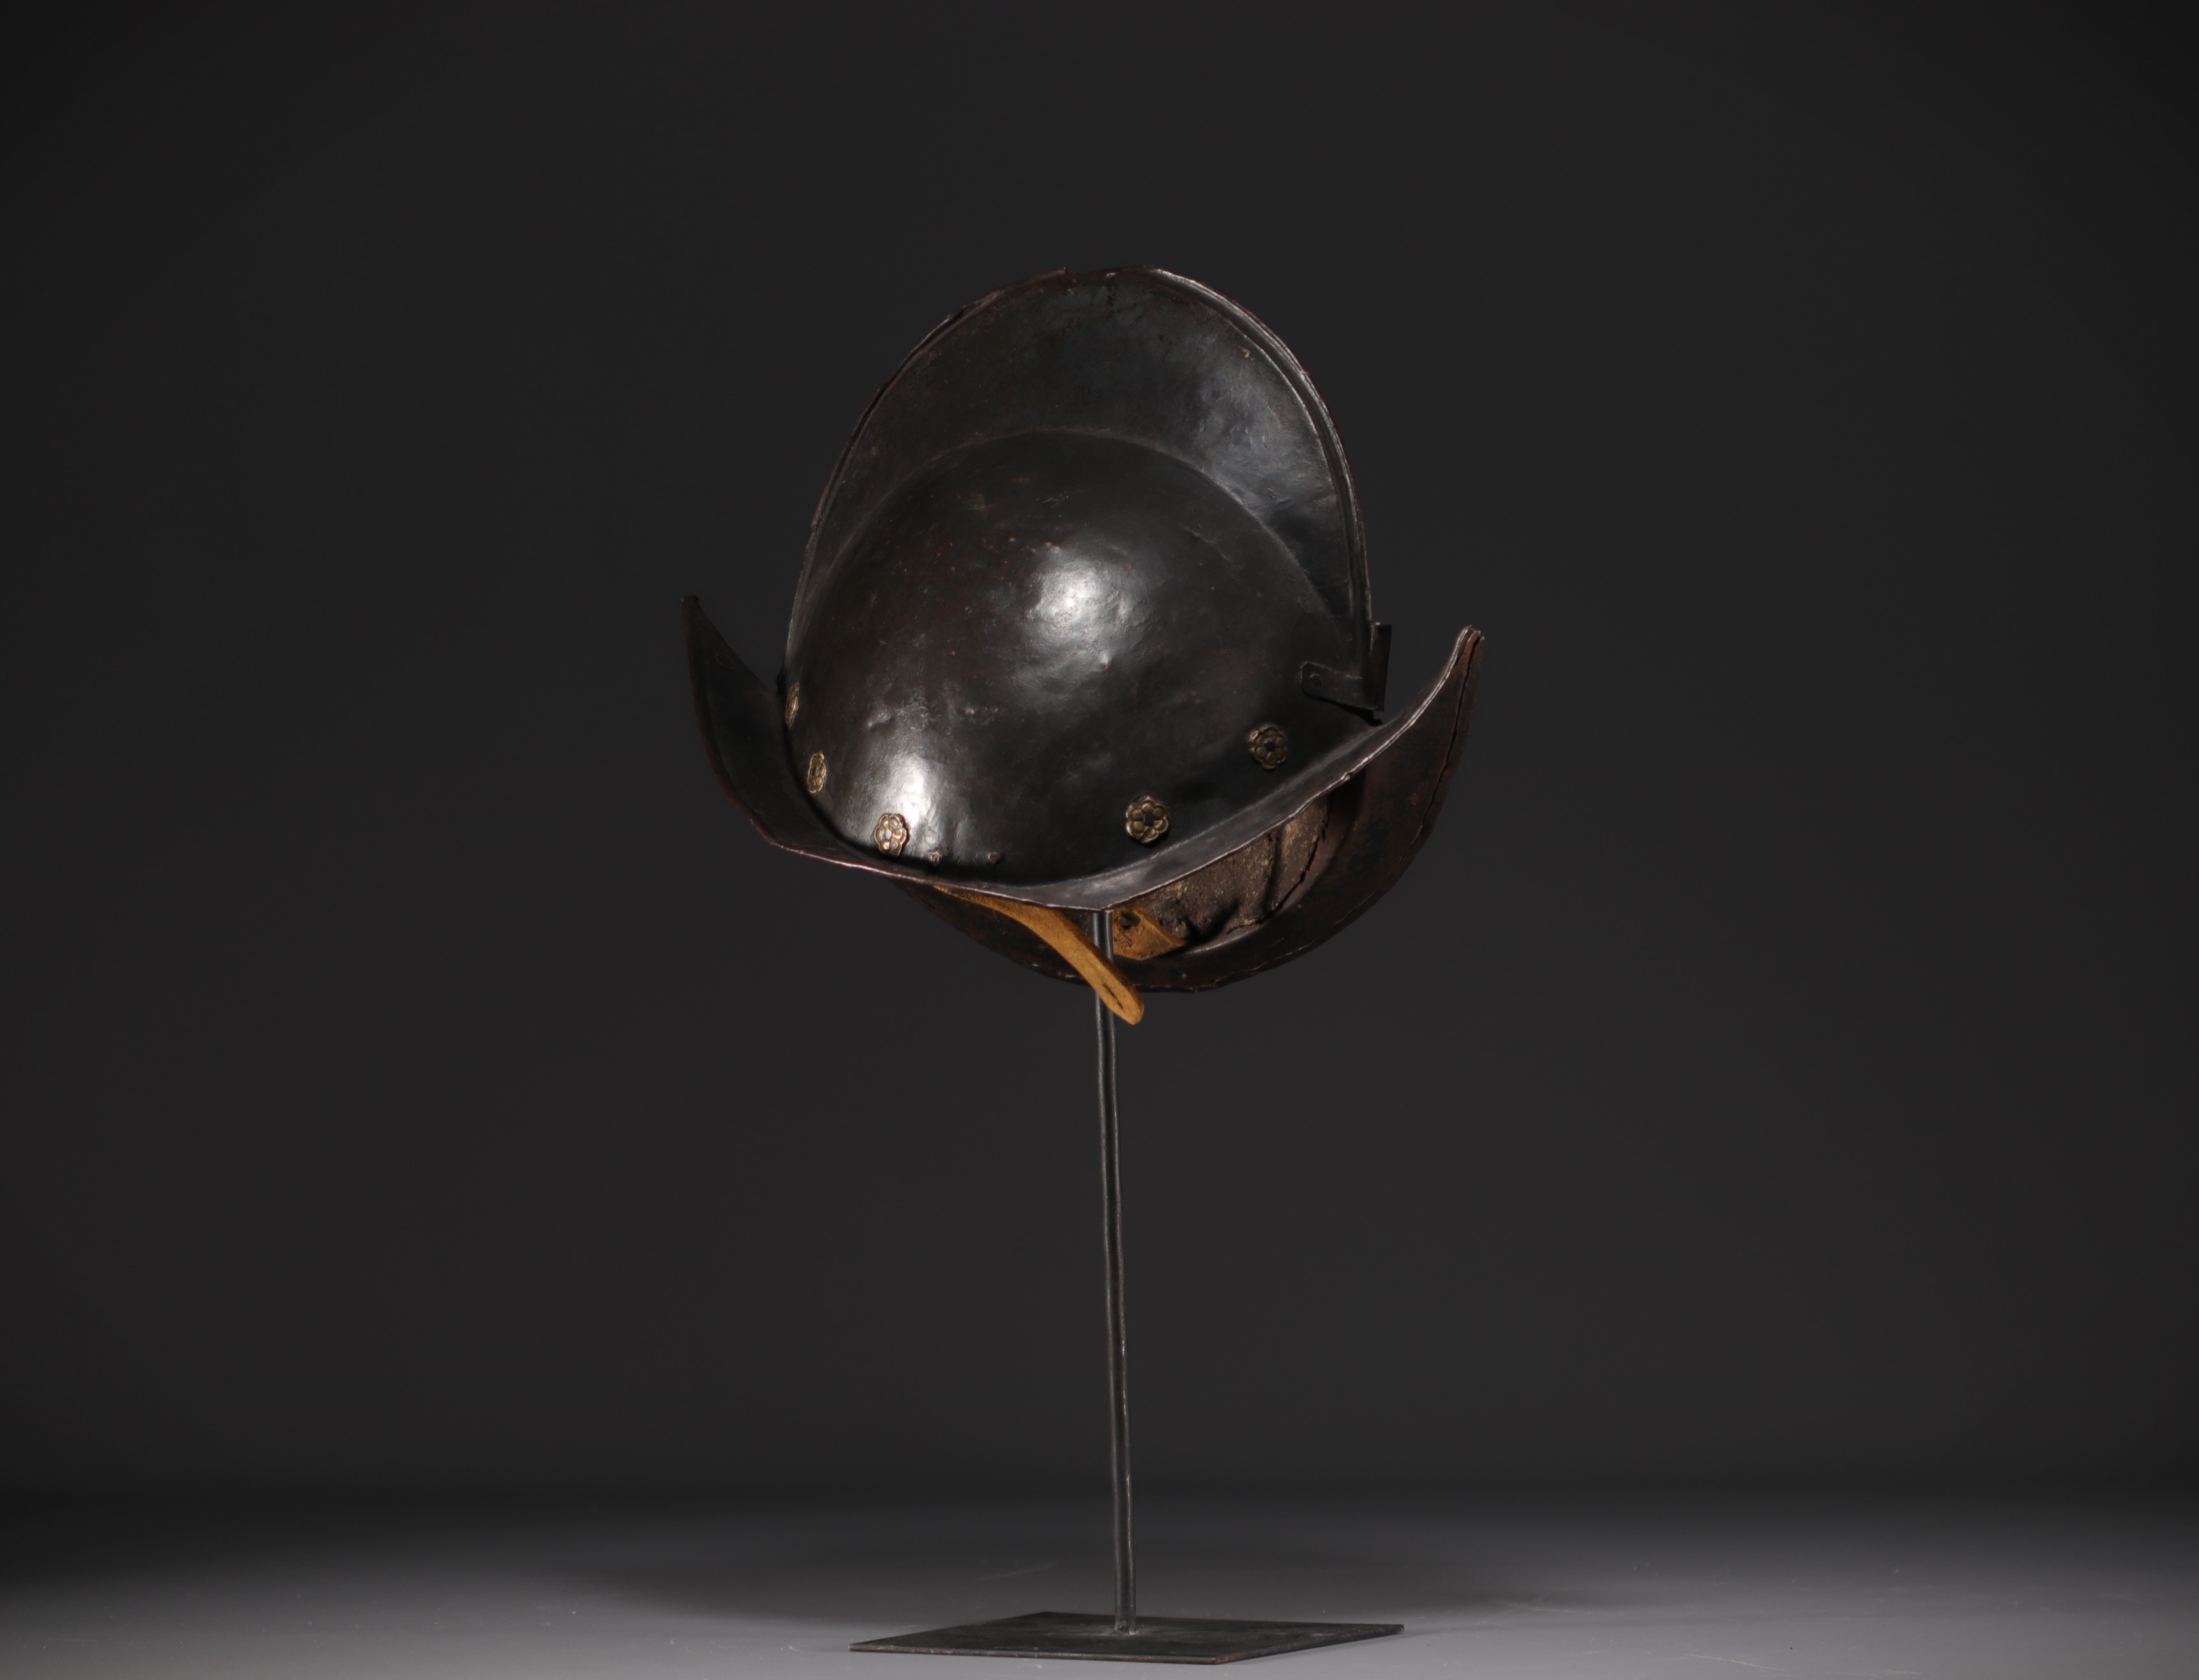 Morion helmet, Nuremberg, dating from the 16th century. - Image 6 of 6